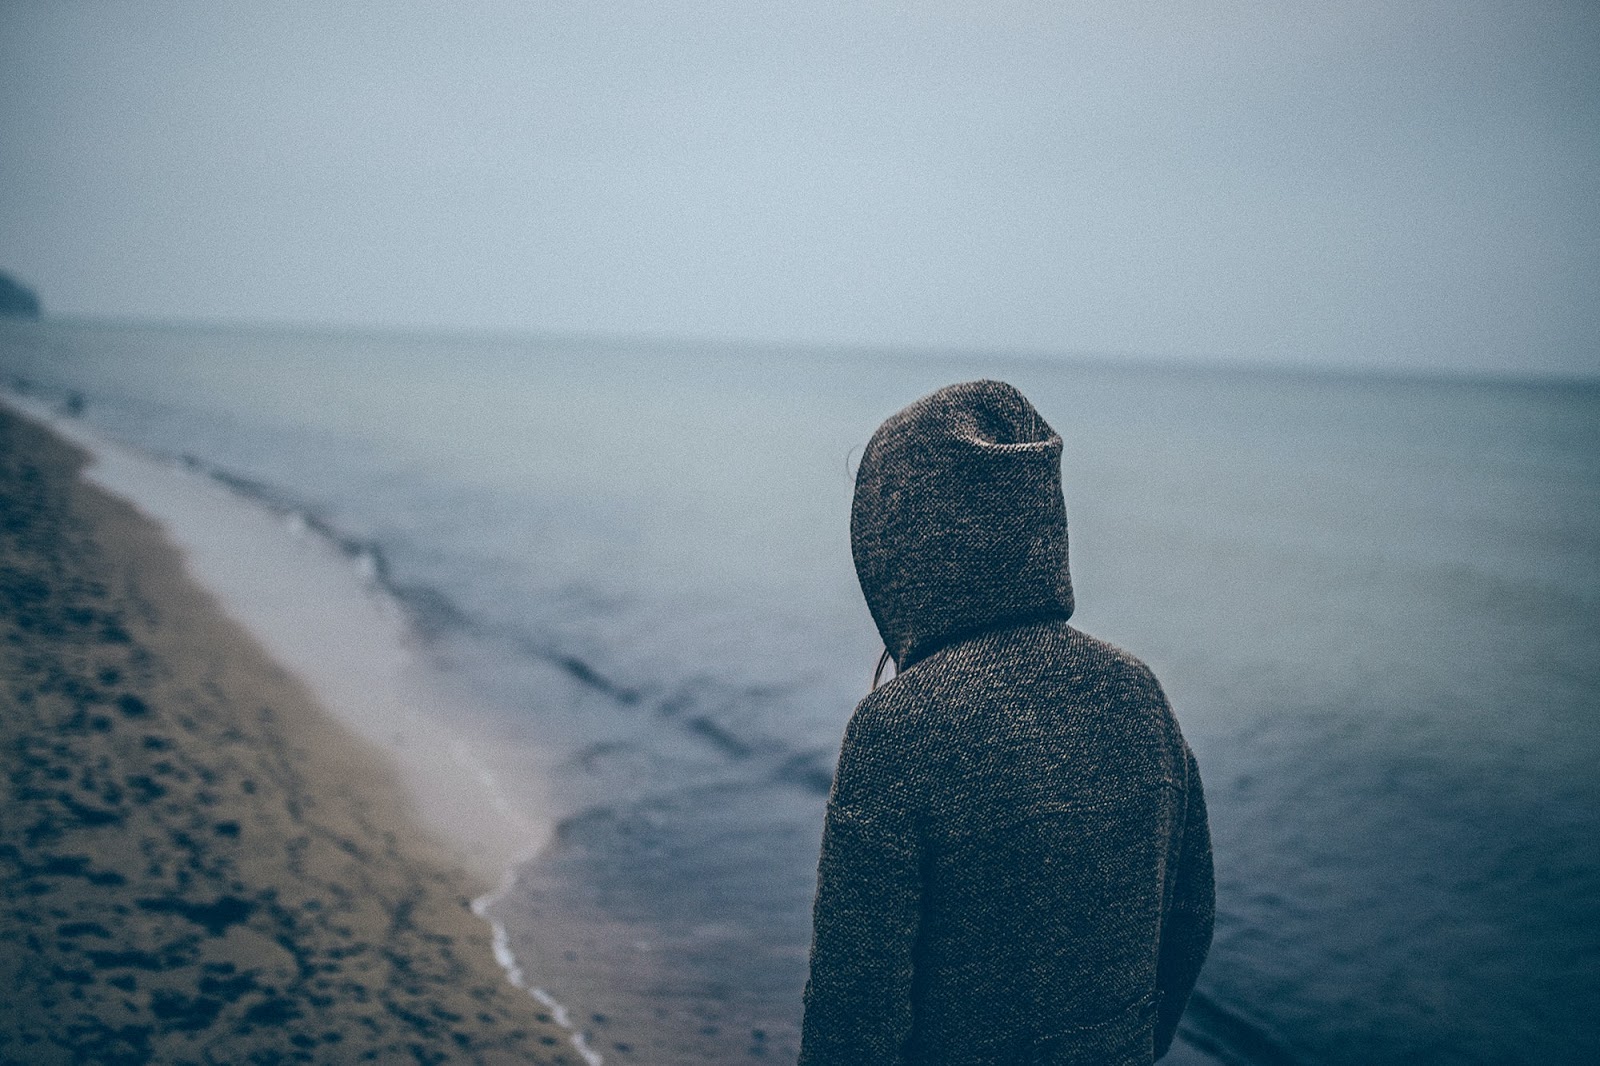 coping with loneliness withtherapy